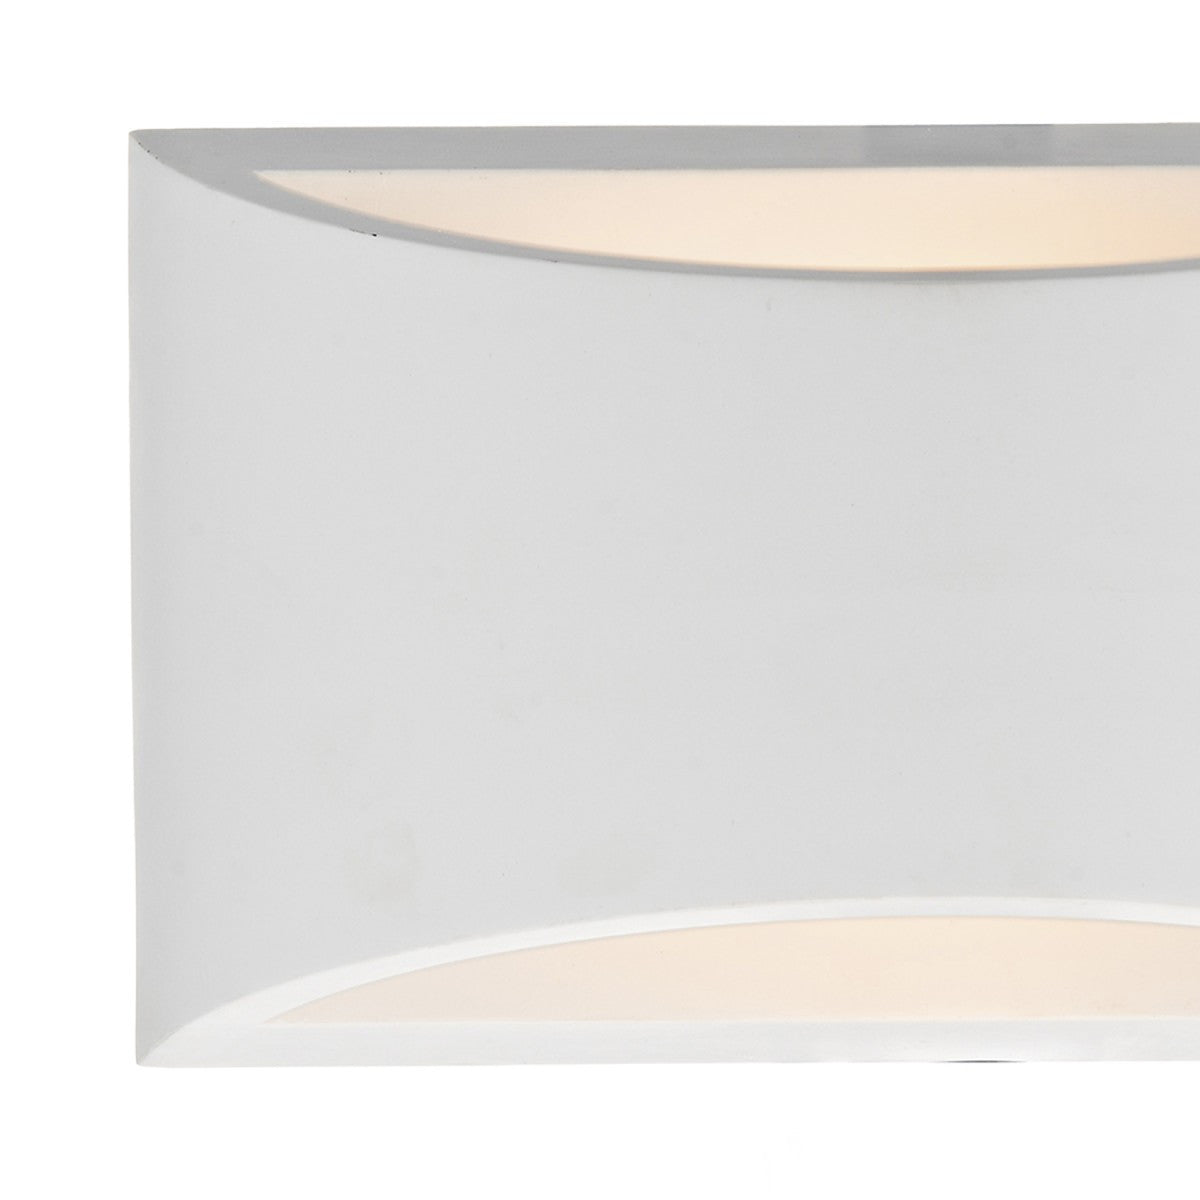 Hove White Small Wall Washer - London Lighting - 2